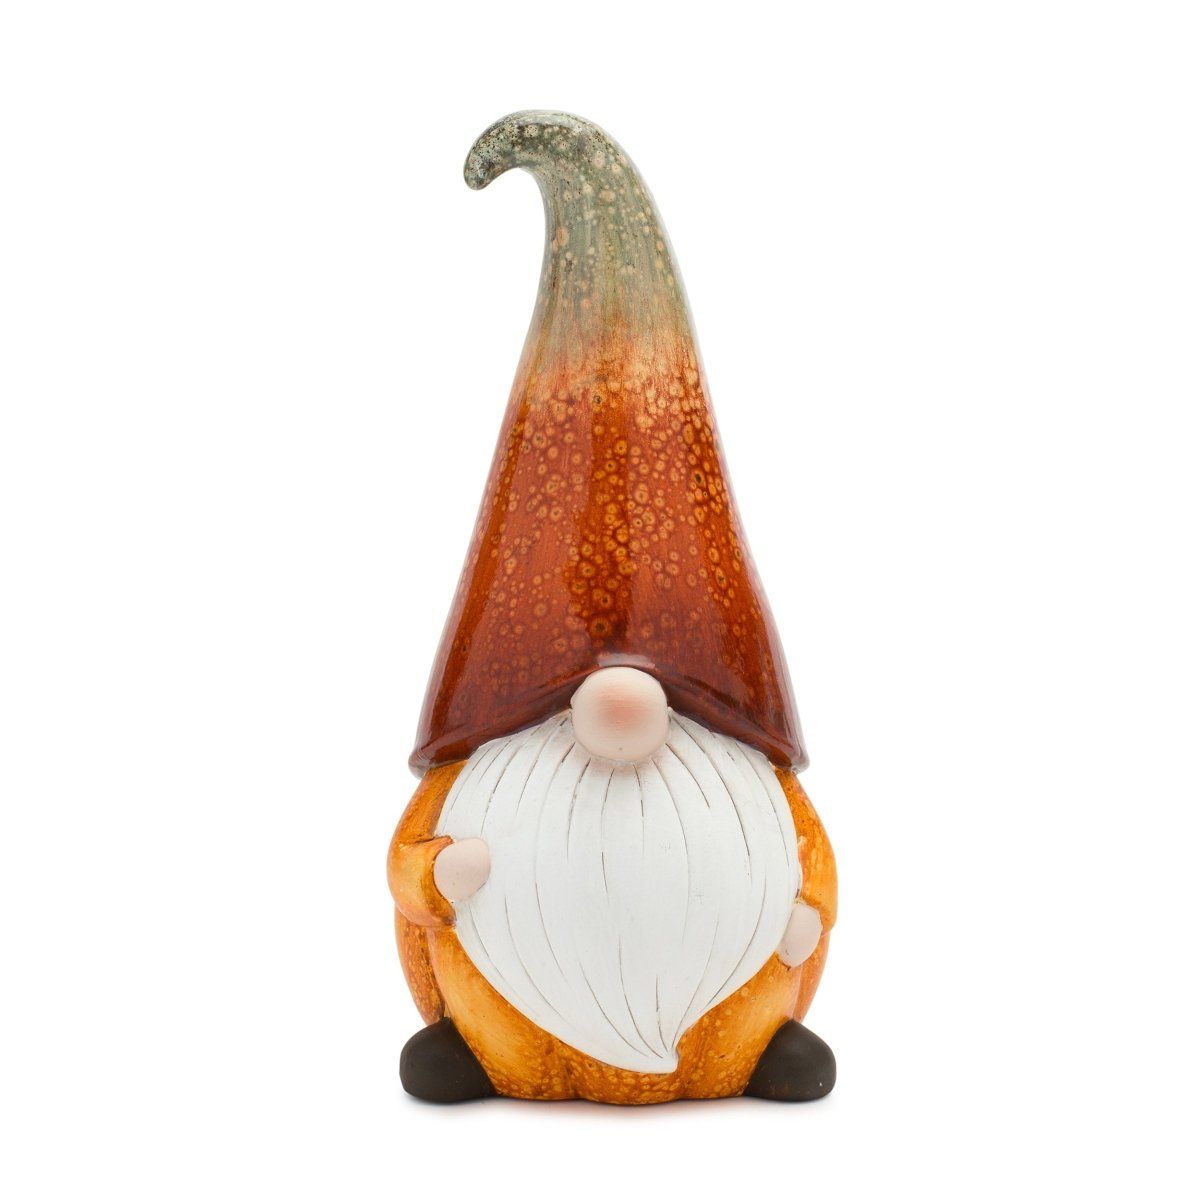 Shop For Terra Cotta Pumpkin Gnome with Ombre Hat (Set of 2) 83468DS